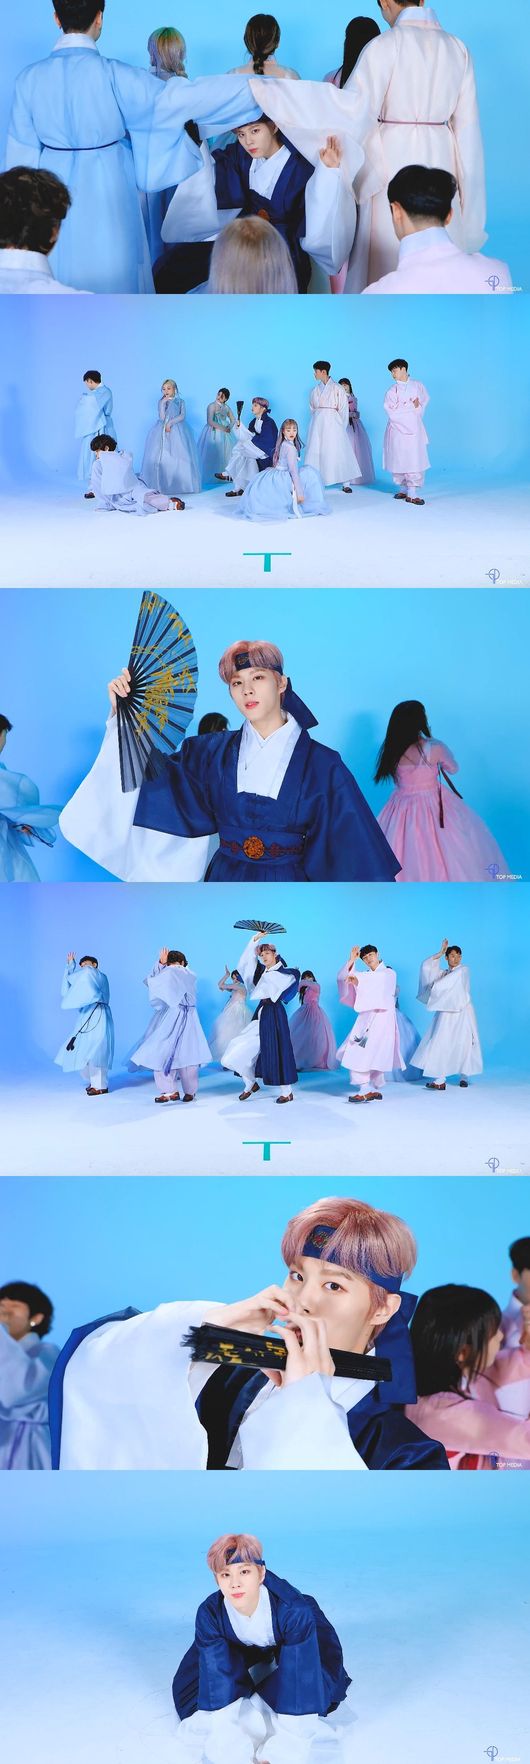 Kim Woo-suk Gifted a special gift to his fans by releasing the Korean traditional clothing version dance video and the rice cake soup cooking video.On the 11th, Kim Woo-seoks official YouTube channel received a hot response with the release of the dance video of the title song 2ND DESIRE TASTY, Sugar Korean traditional clothing.In the video, Kim Woo-suk and dancers all appeared in Korean traditional clothing and boasted oriental beauty and luxurious atmosphere.Sugar and Korean traditional clothing, which have a lovely Feelings, met to show different charms, as well as Kim Woo-seoks extraordinary visuals caught the attention by reminding them of Flower Doryeong at once.On the 12th, Kim Woo-suk opened a video to make rice cake soup, which is the reGiftative food of the snow.Kim Woo-suk made a cute mistake in the middle of grooming the ingredients of the rice cake soup, and he showed his unique power while laughing, and successfully finished the rice cake soup dish.Kim Woo-suk, who did not miss the Ten Day during the New Year holidays, released his second solo album 2ND DESIRE TASTY on the 8th.2ND DESIRE TASTY is an album that expresses the Feelings of love like a taste.Unlike the first solo album 1ST DESIRE GREED, which showed a deadly charm with the theme of greed, it features a sweet and lovely concept.Kim Woo-suk participated in the production of all the albums including the title song Sugar, adding his own music color.Kim Woo-suk, who has returned to a different charm, is going to perform active comeback activities.thiopymedia